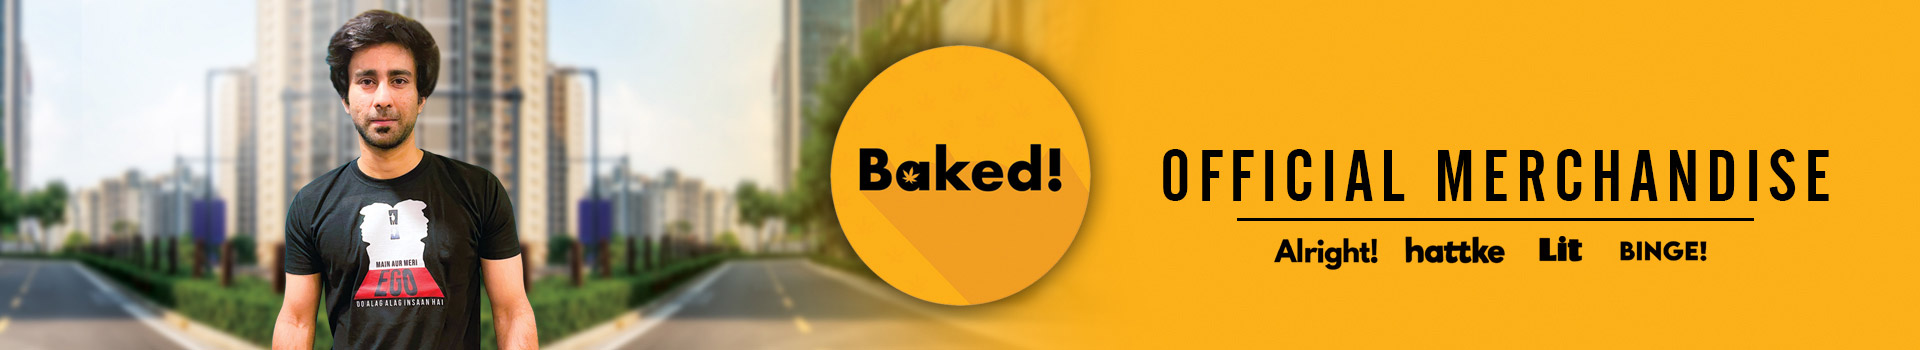 Baked - Official Merchandise